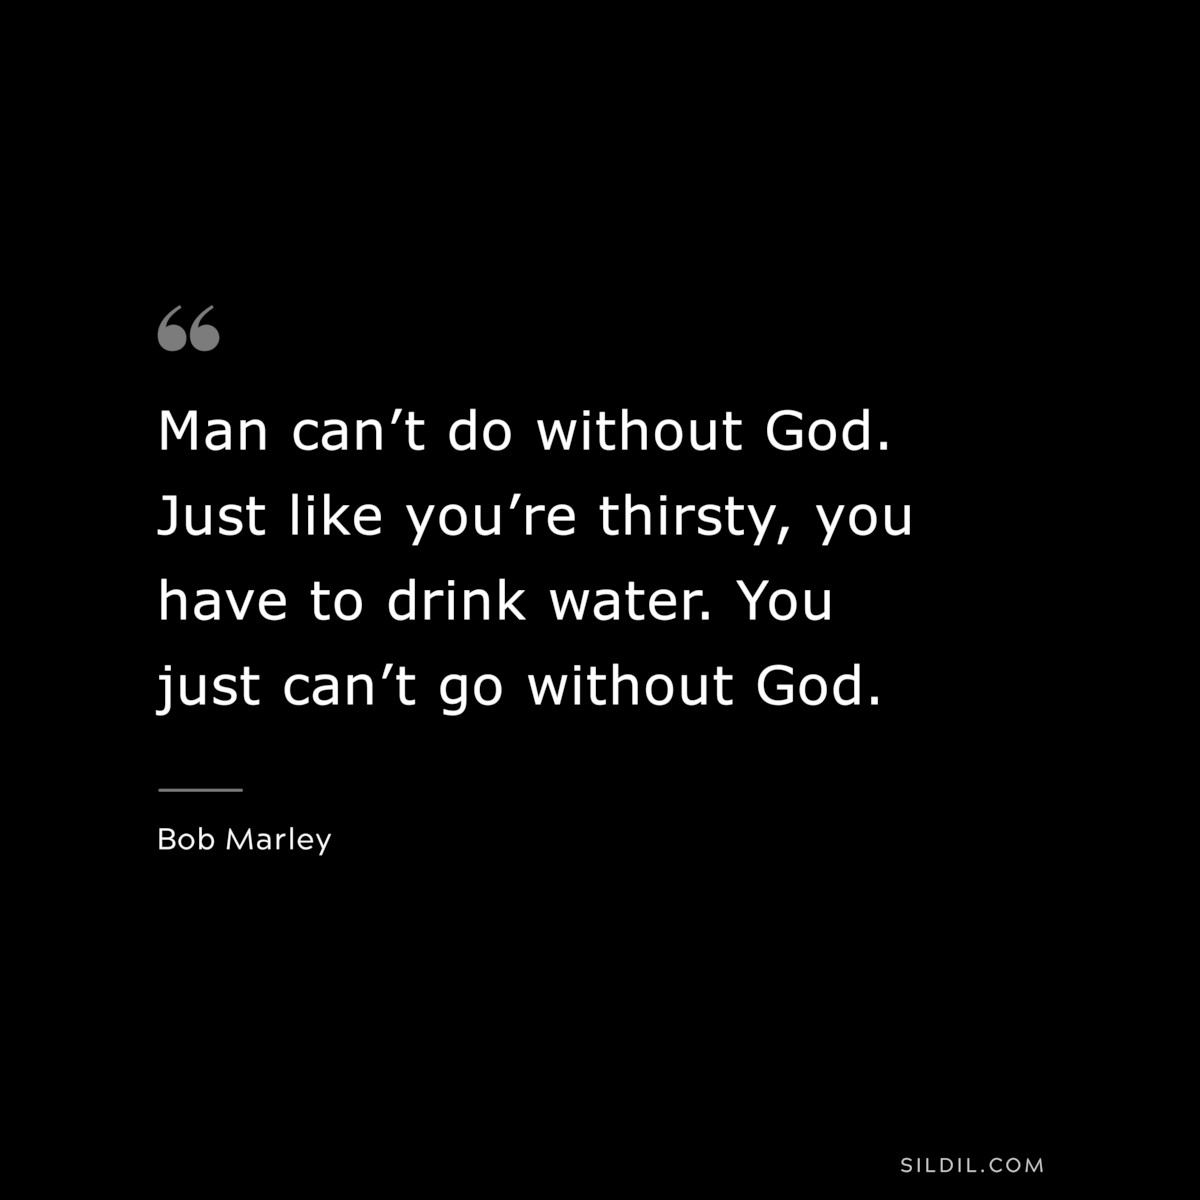 Man can’t do without God. Just like you’re thirsty, you have to drink water. You just can’t go without God. ― Bob Marley